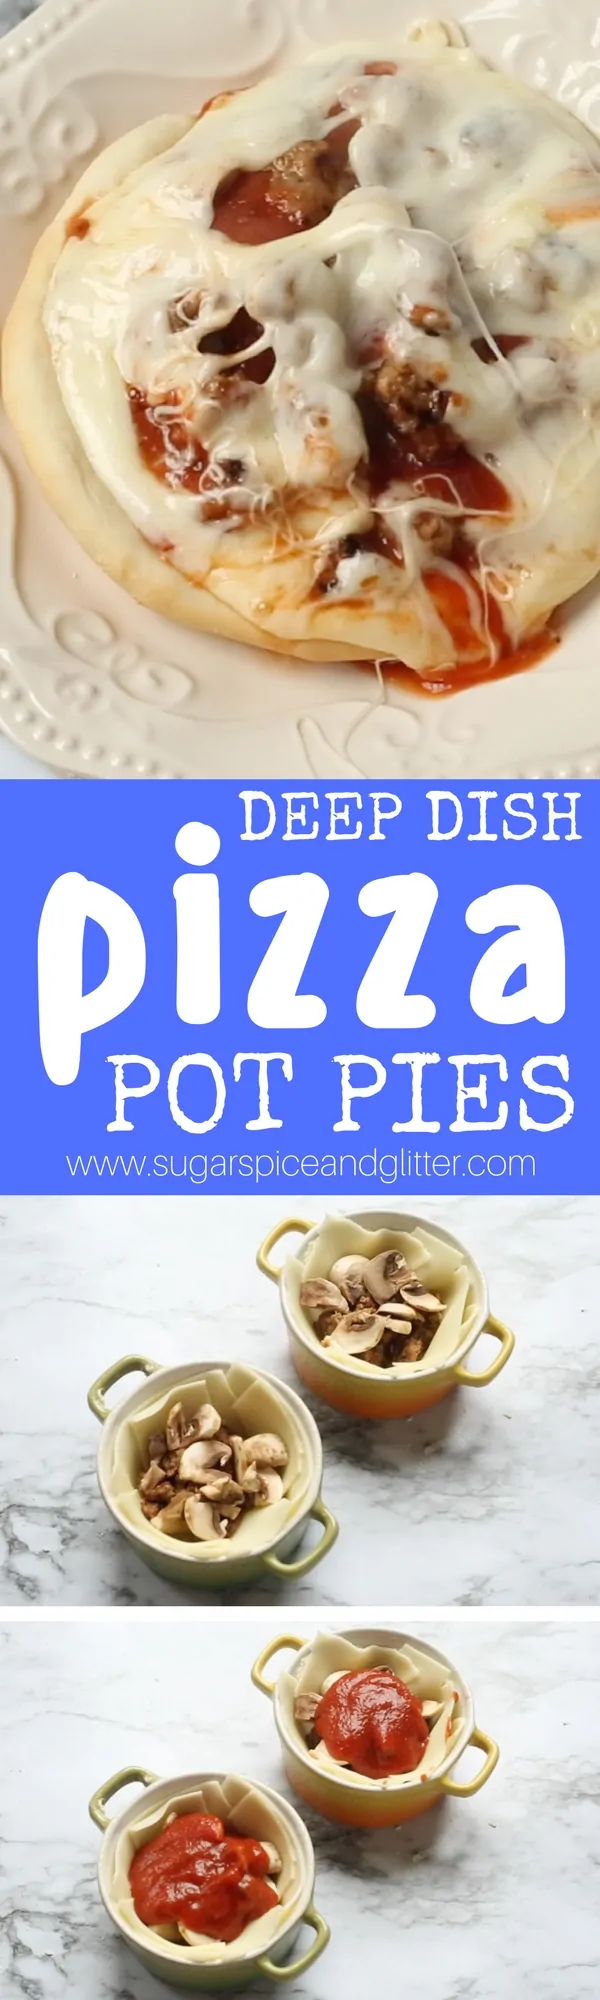 Forget boring pot pies, this pizza pot pie is delicious recipe your whole family will go crazy for - and the kids will love helping to make!